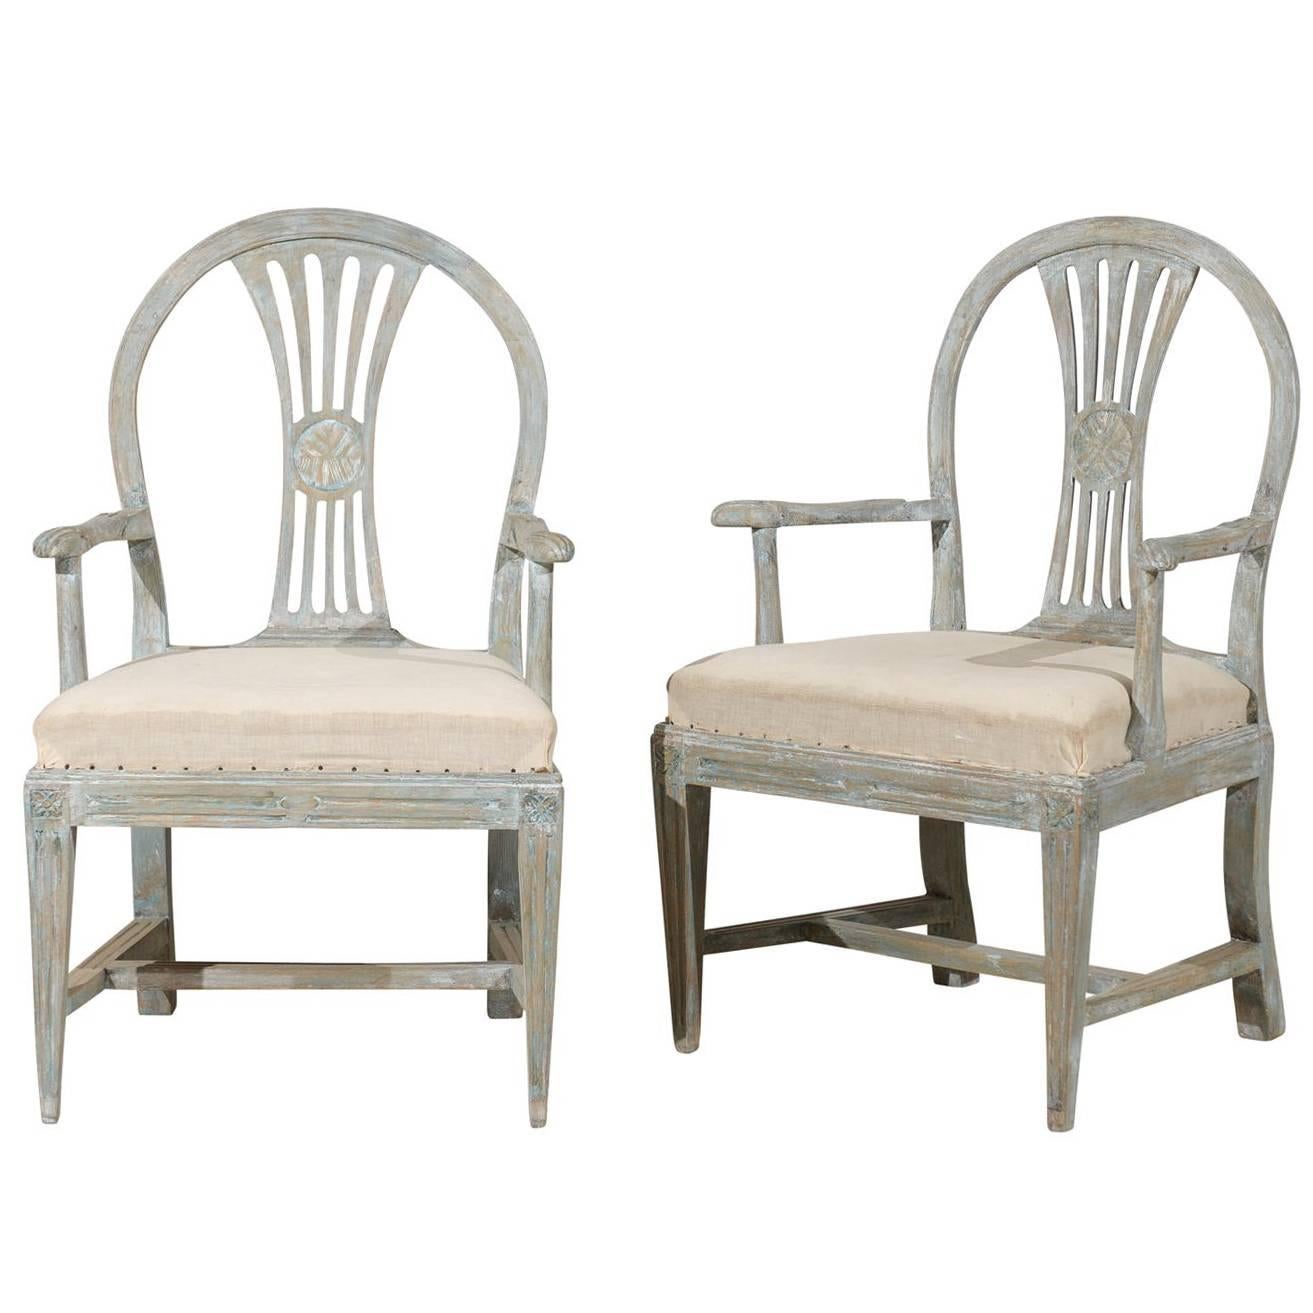 A Pair of Swedish 19th Century Period Gustavian Painted Wood Armchairs